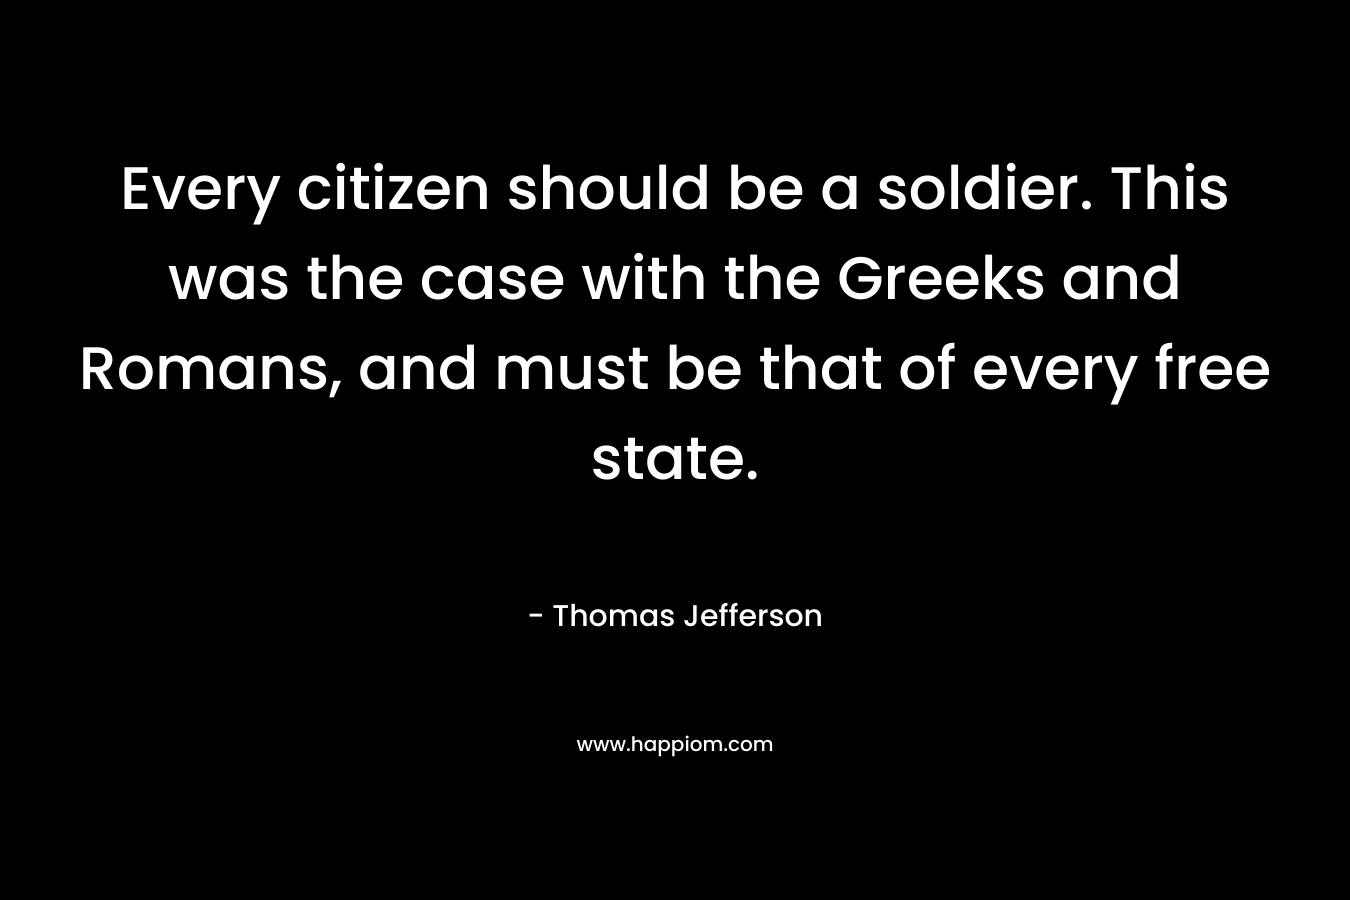 Every citizen should be a soldier. This was the case with the Greeks and Romans, and must be that of every free state. – Thomas Jefferson